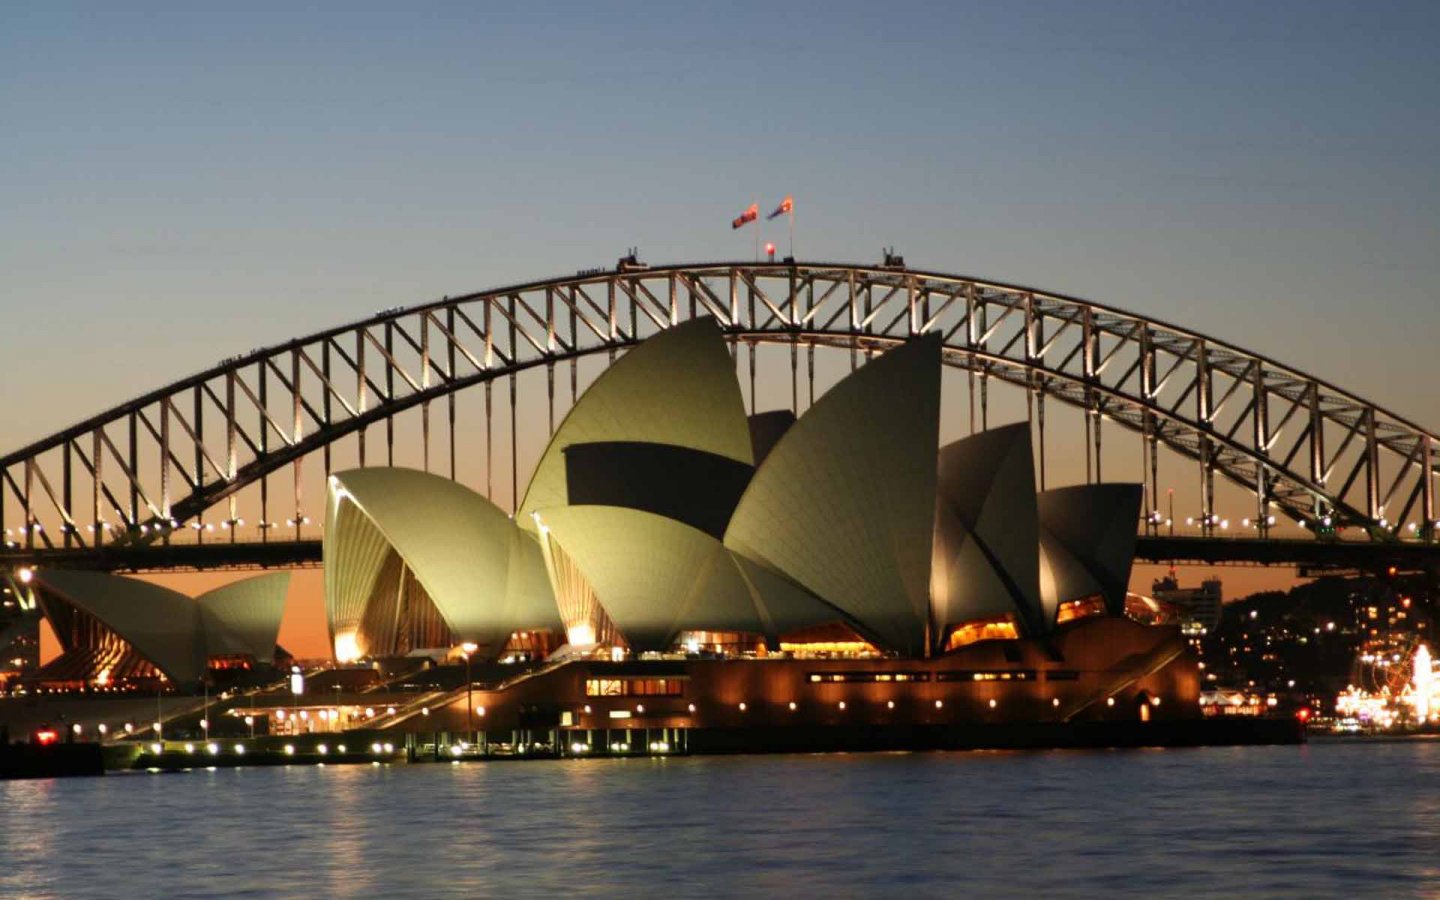  22 2015 By Stephen Comments Off on Sydney Opera House Wallpapers